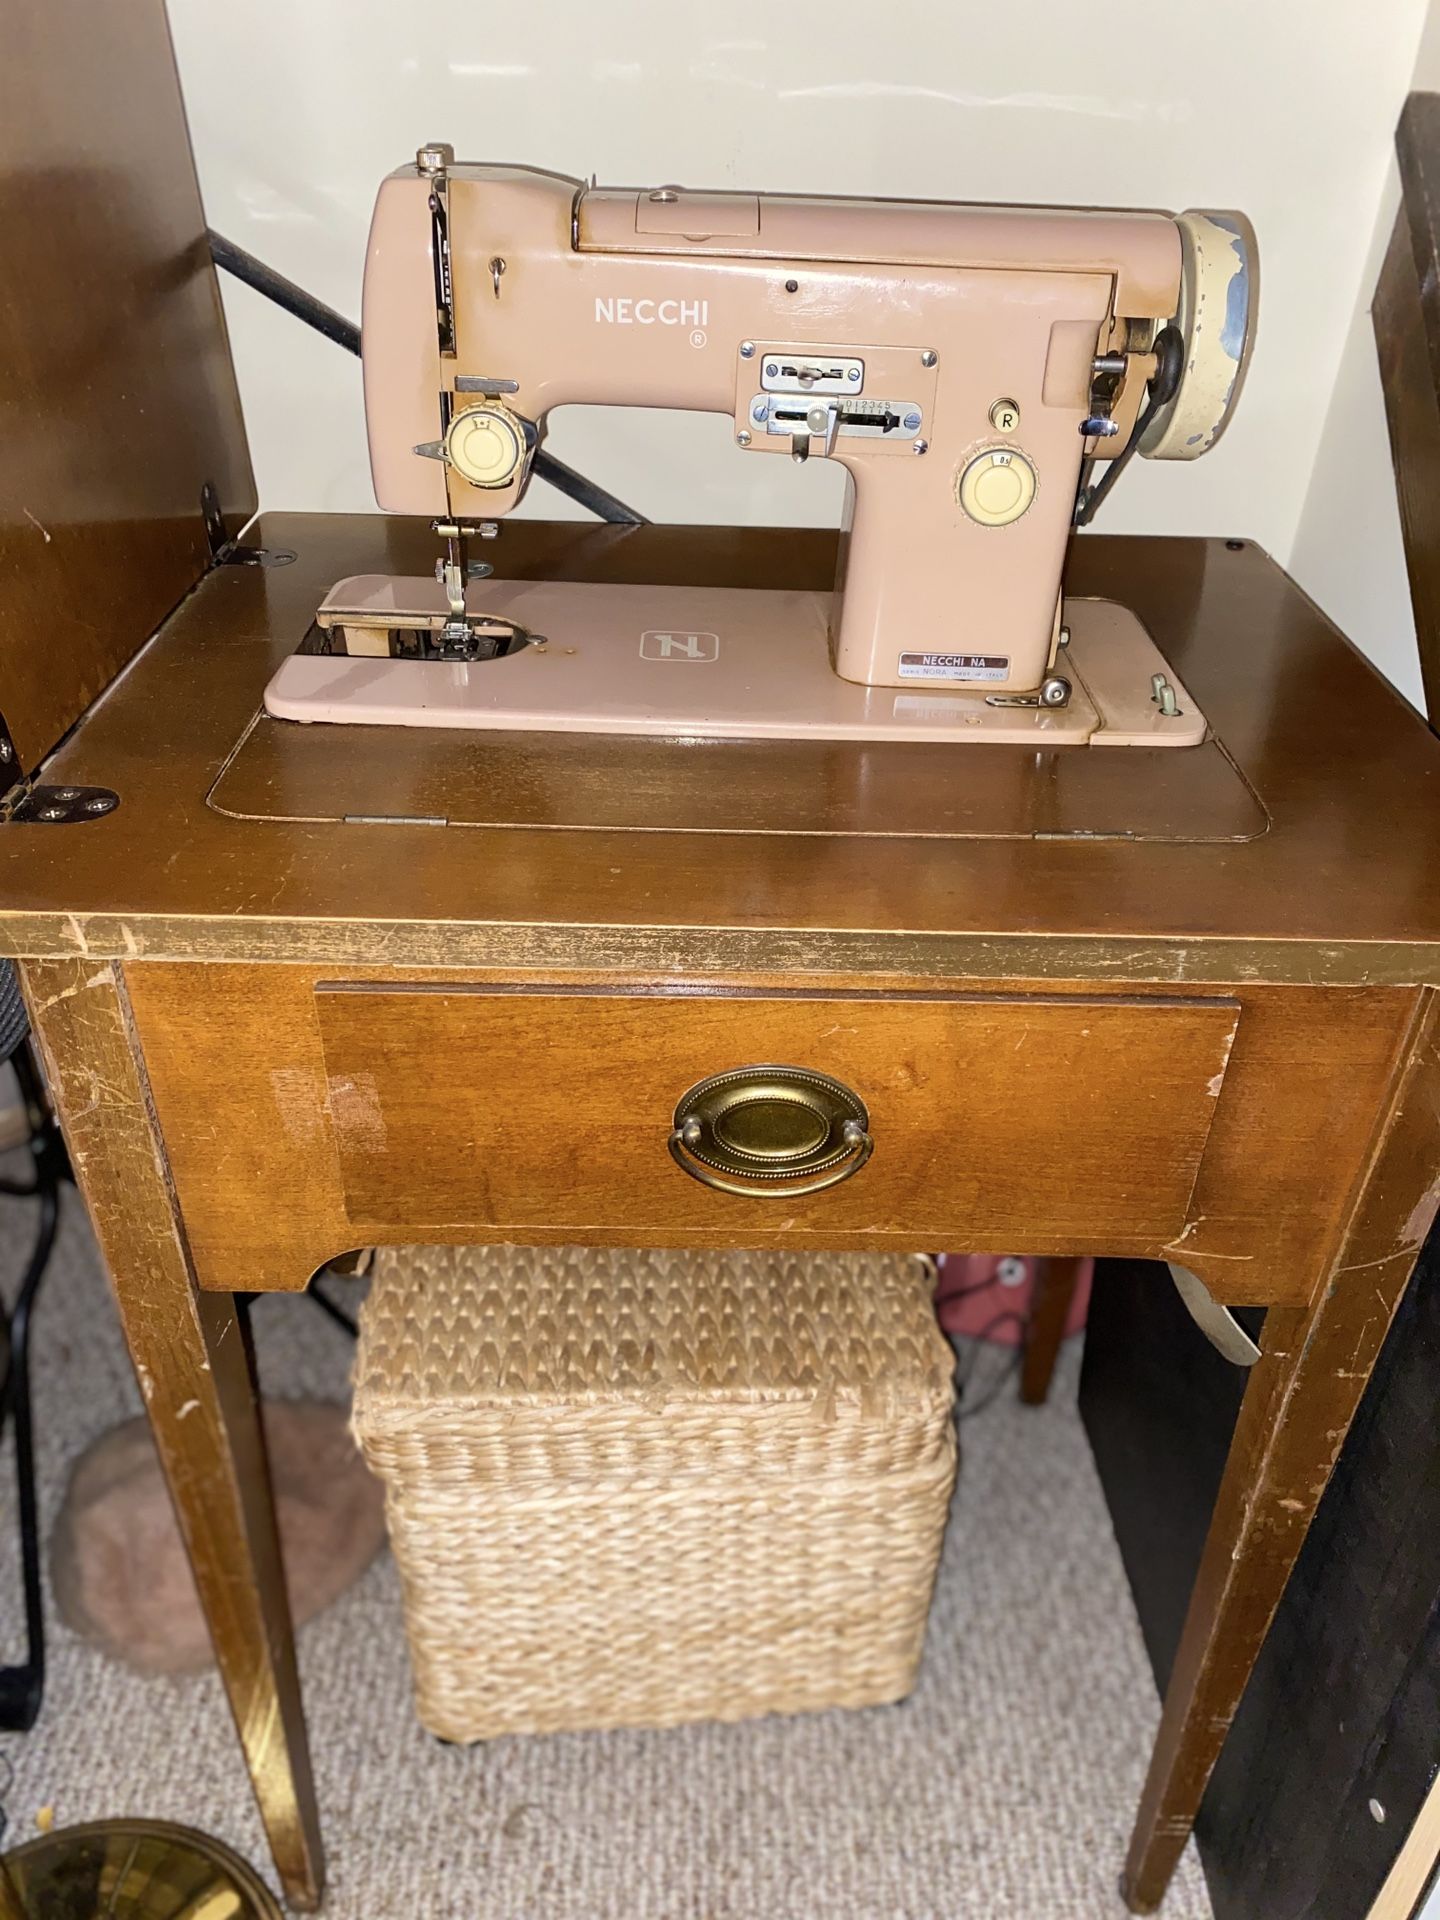 Vintage NECCHI sewing machine made in Italy with cabinet